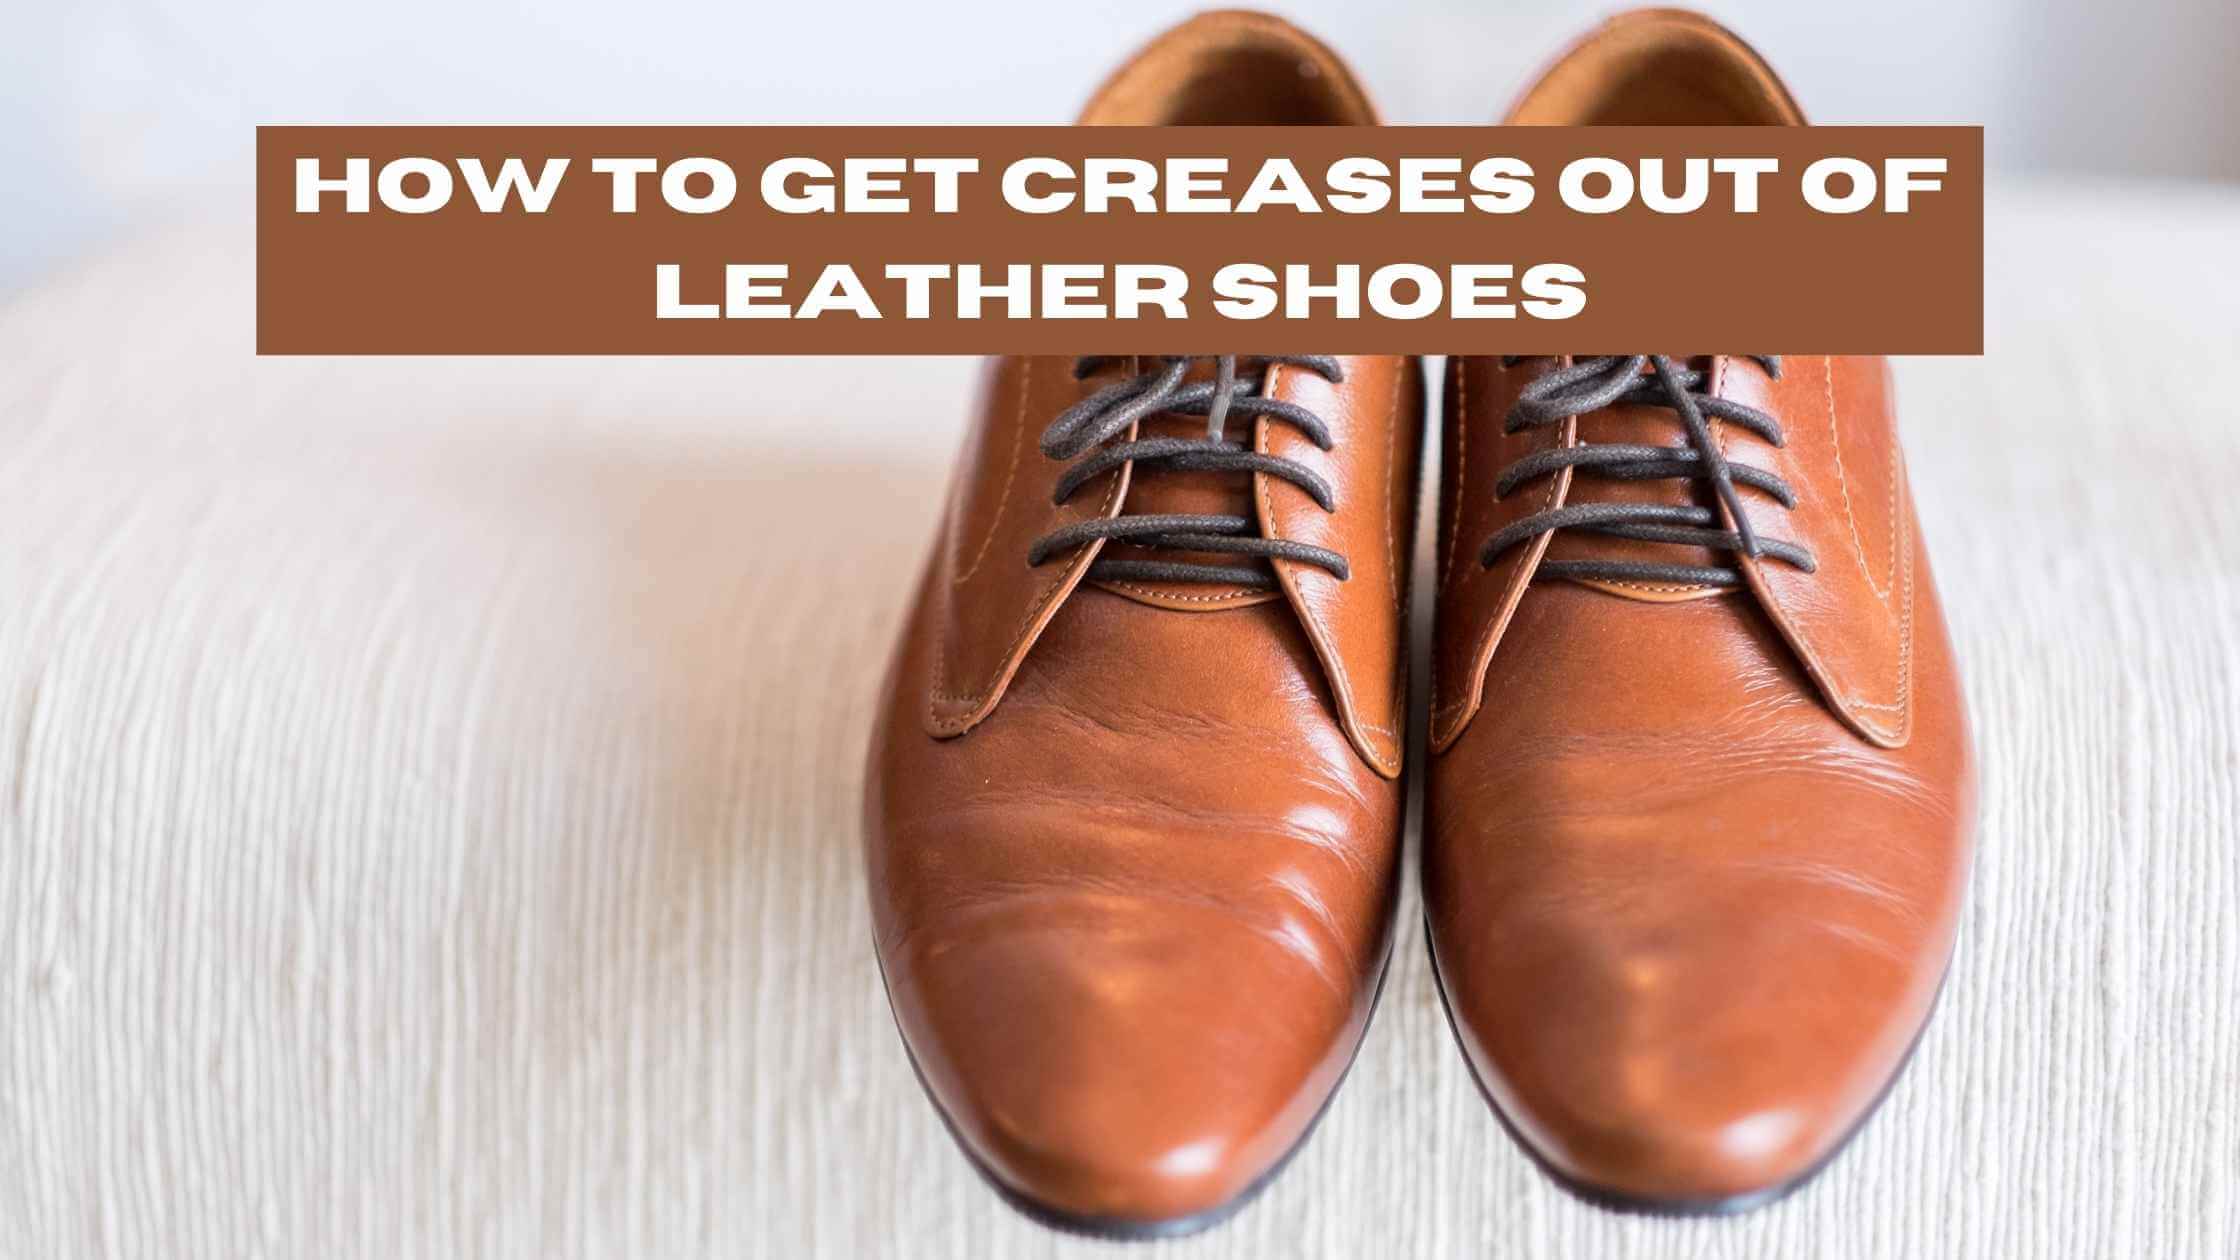 How to Get Creases Out of Leather Shoes